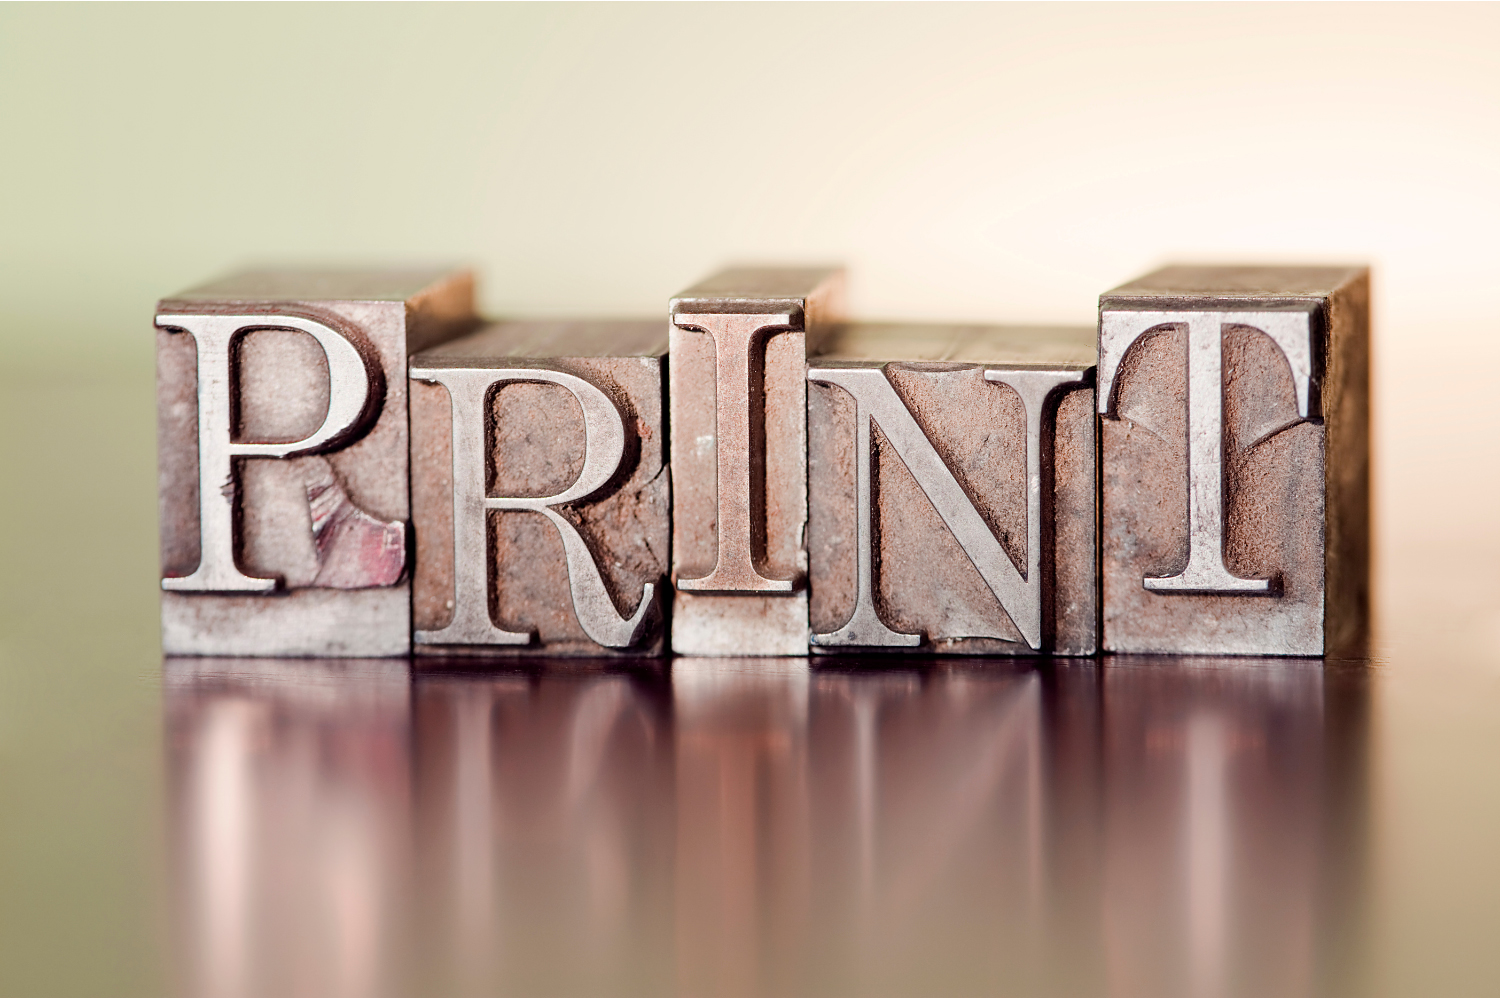 online printing services